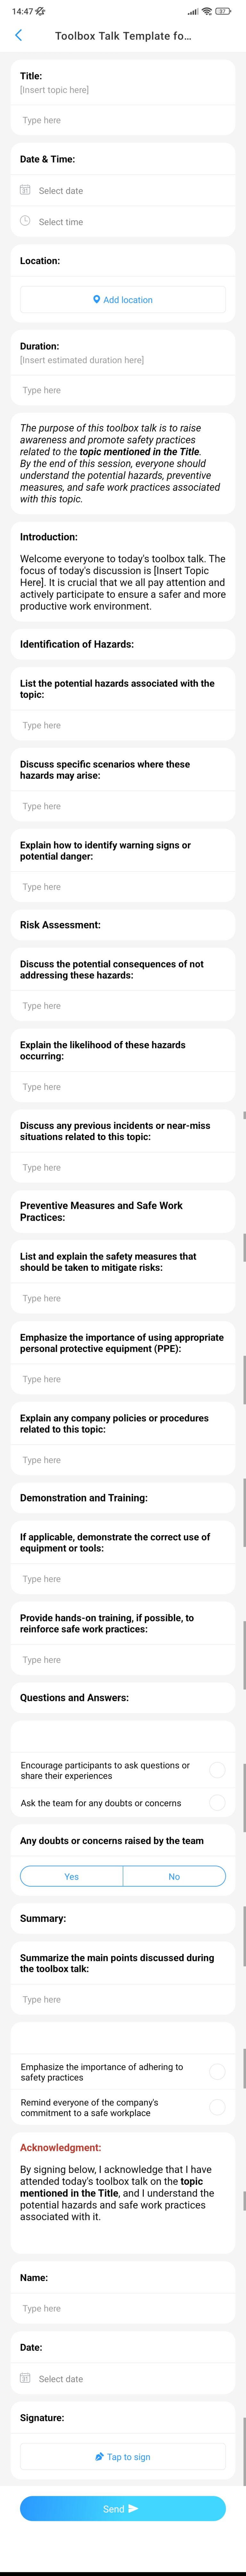 Toolbox Talk Template for Ensuring Workplace Safety screenshot